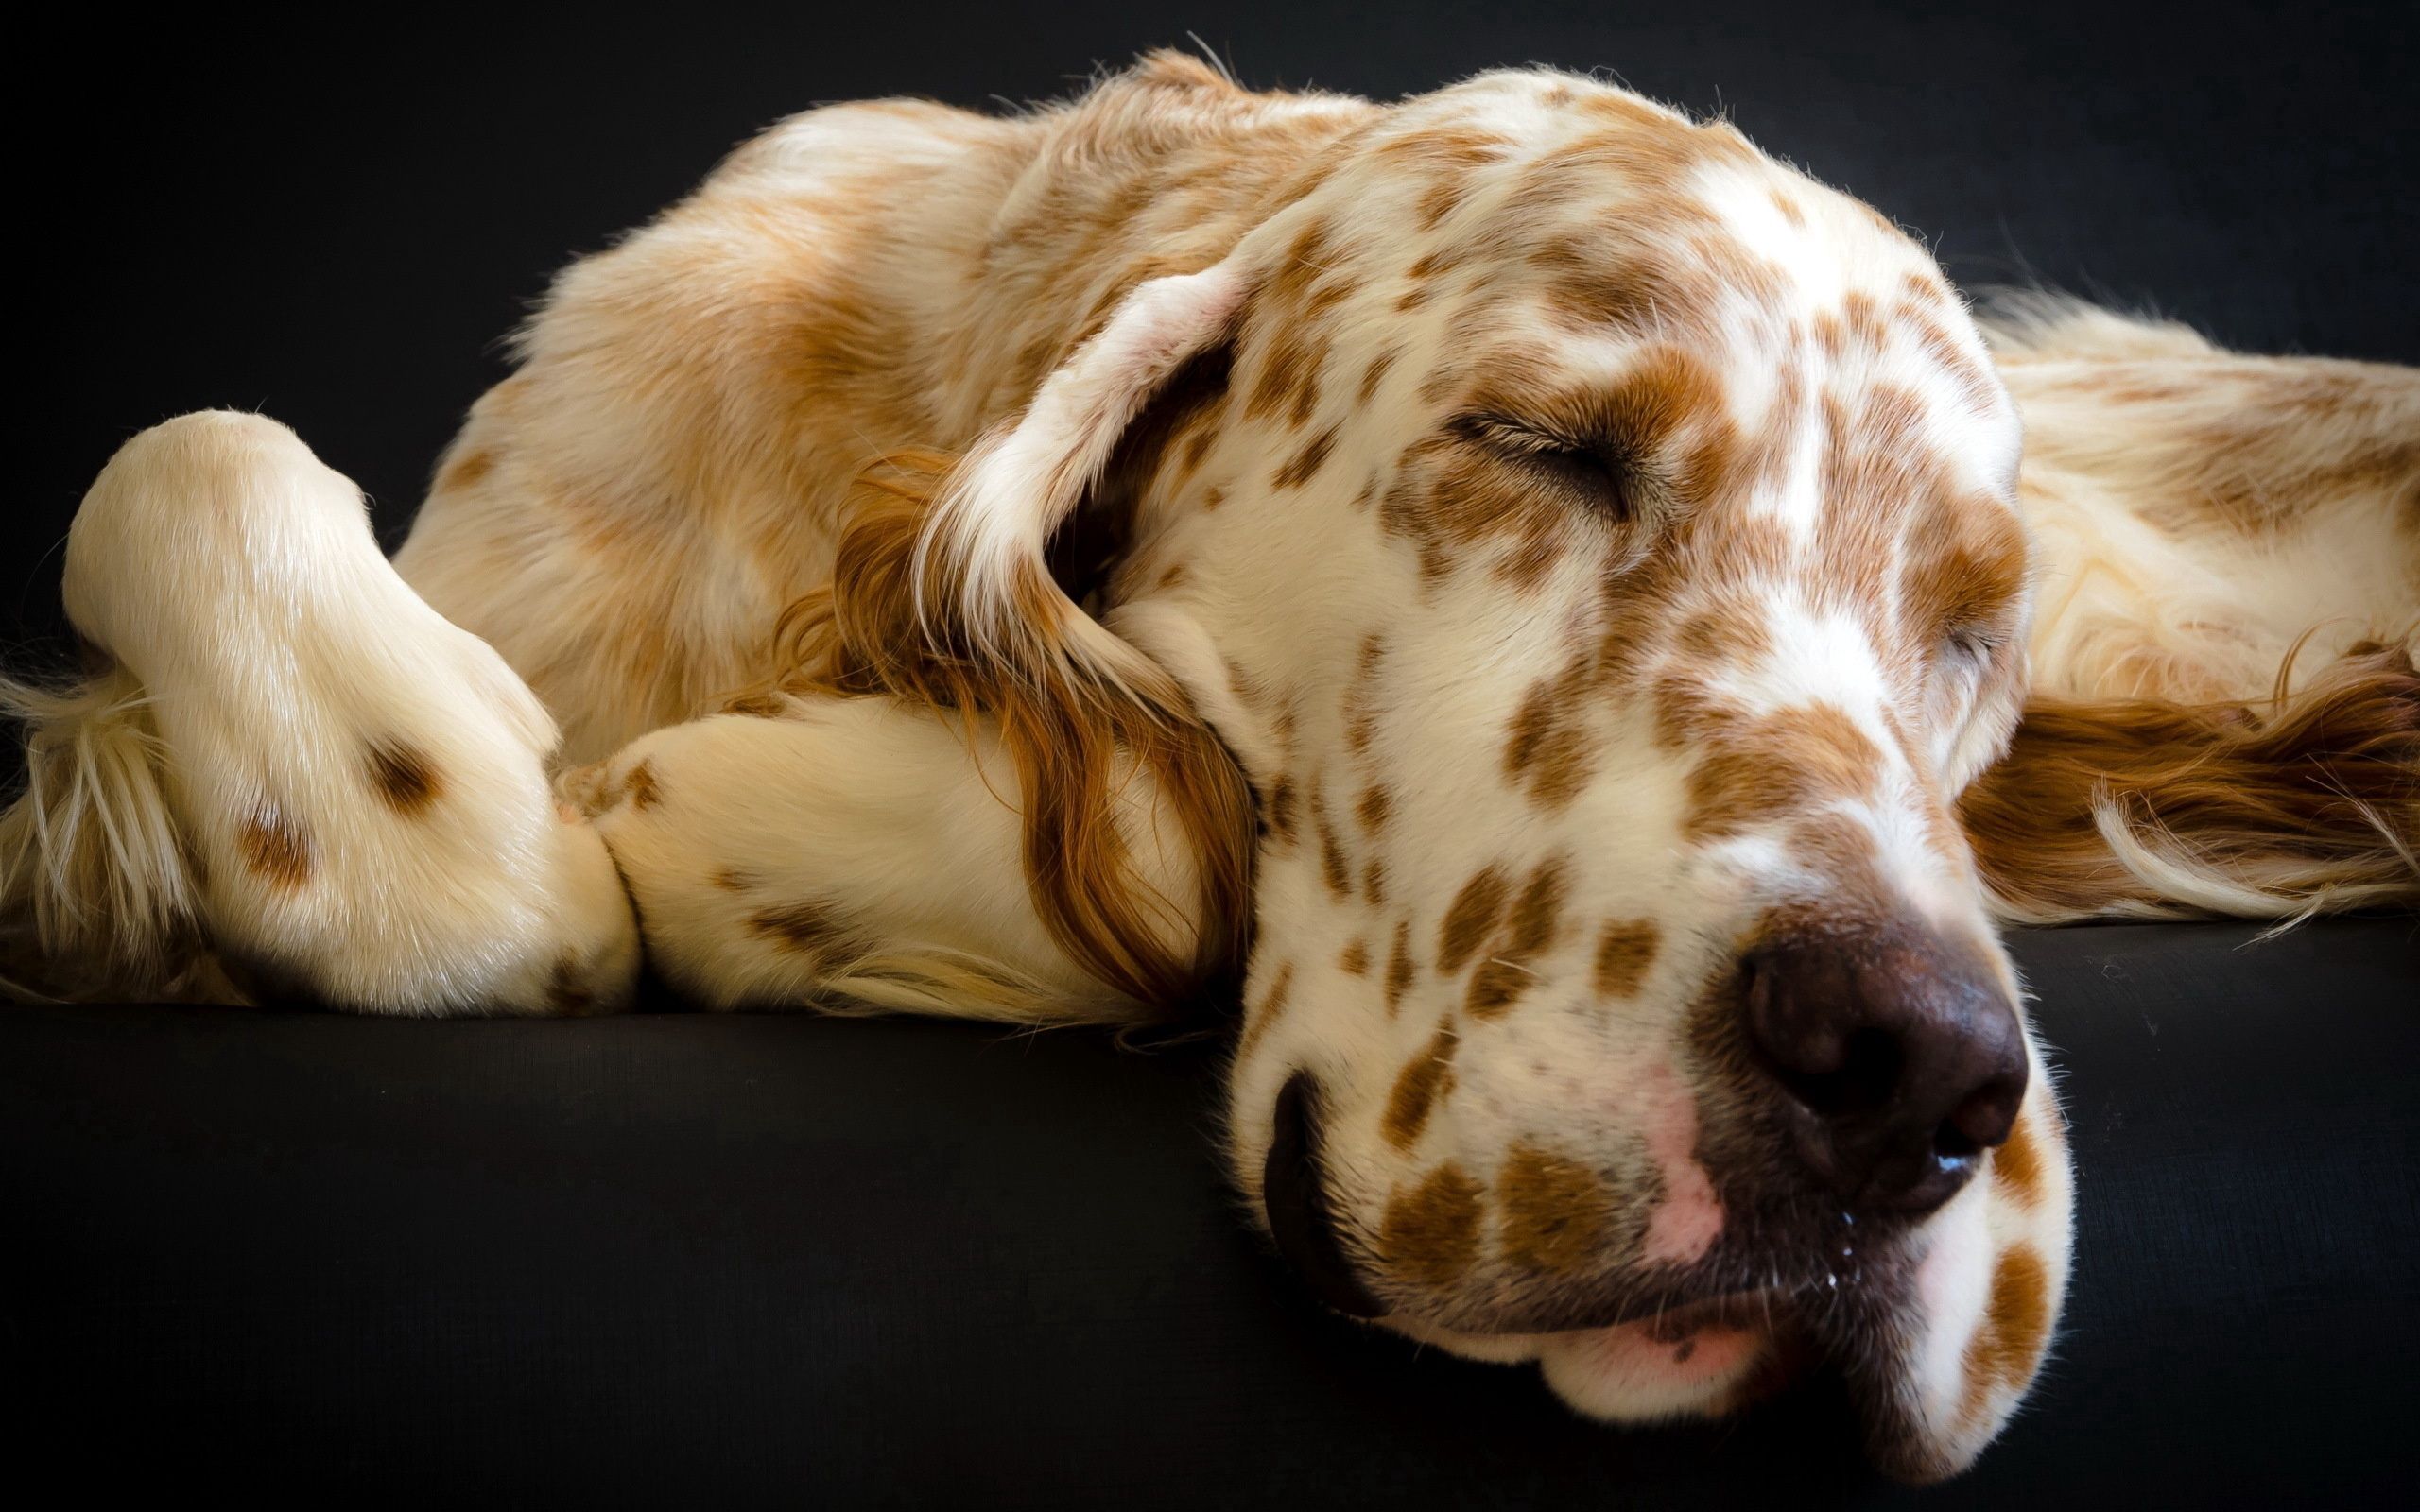 animals, dog, muzzle, spotted, spotty, sleep, dream cell phone wallpapers